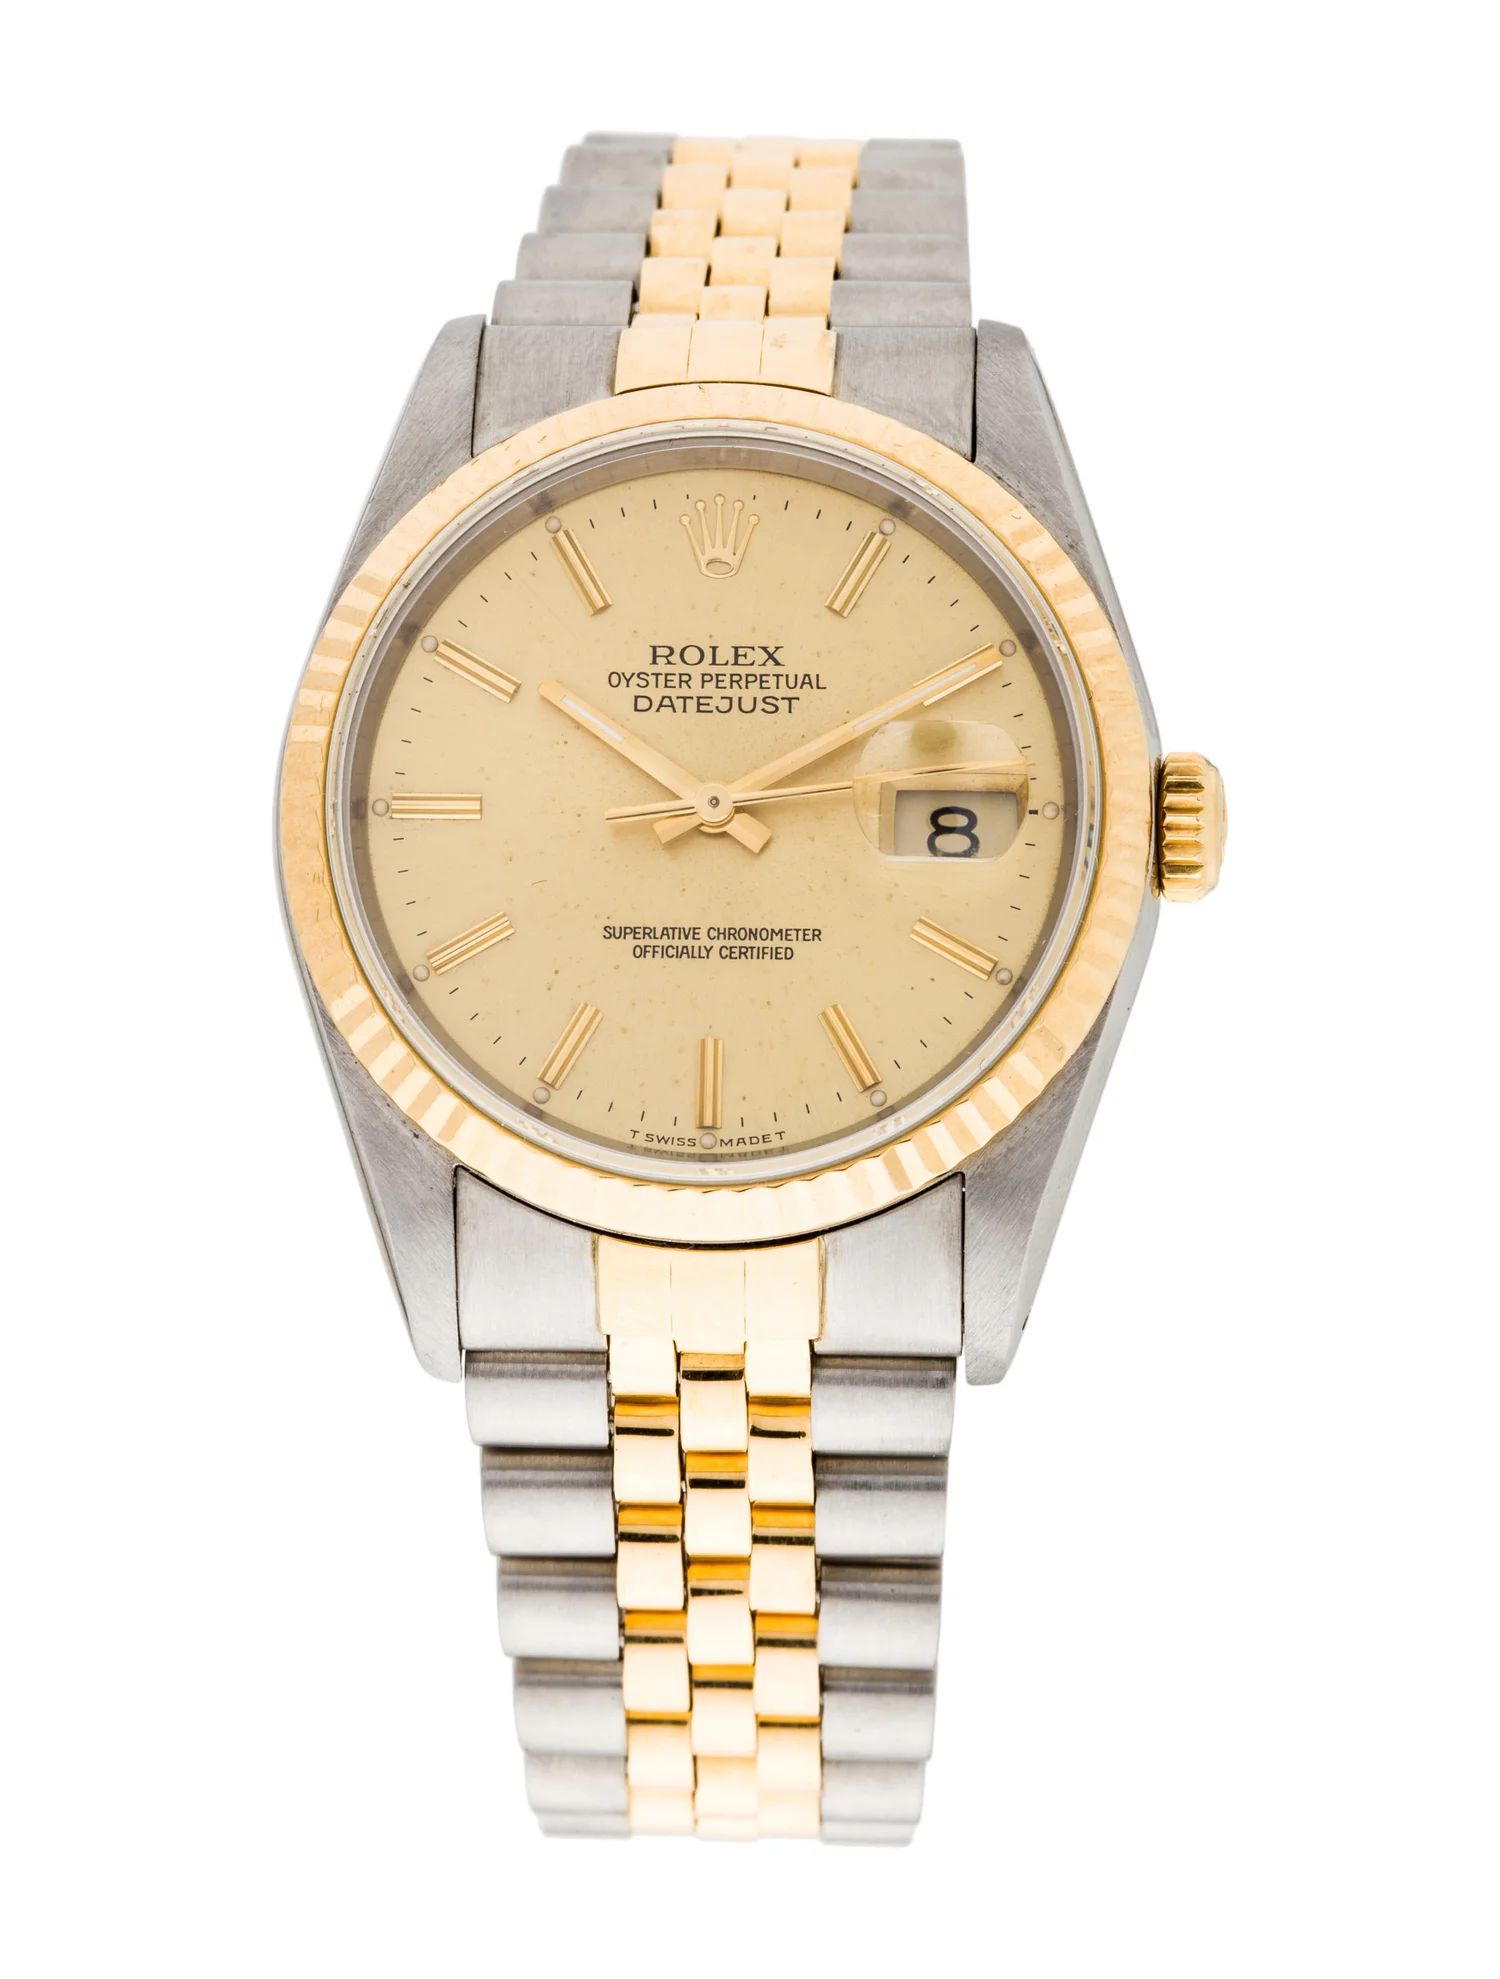 Rolex Datejust Watch - Bracelet -
          RLX26560 | The RealReal | The RealReal